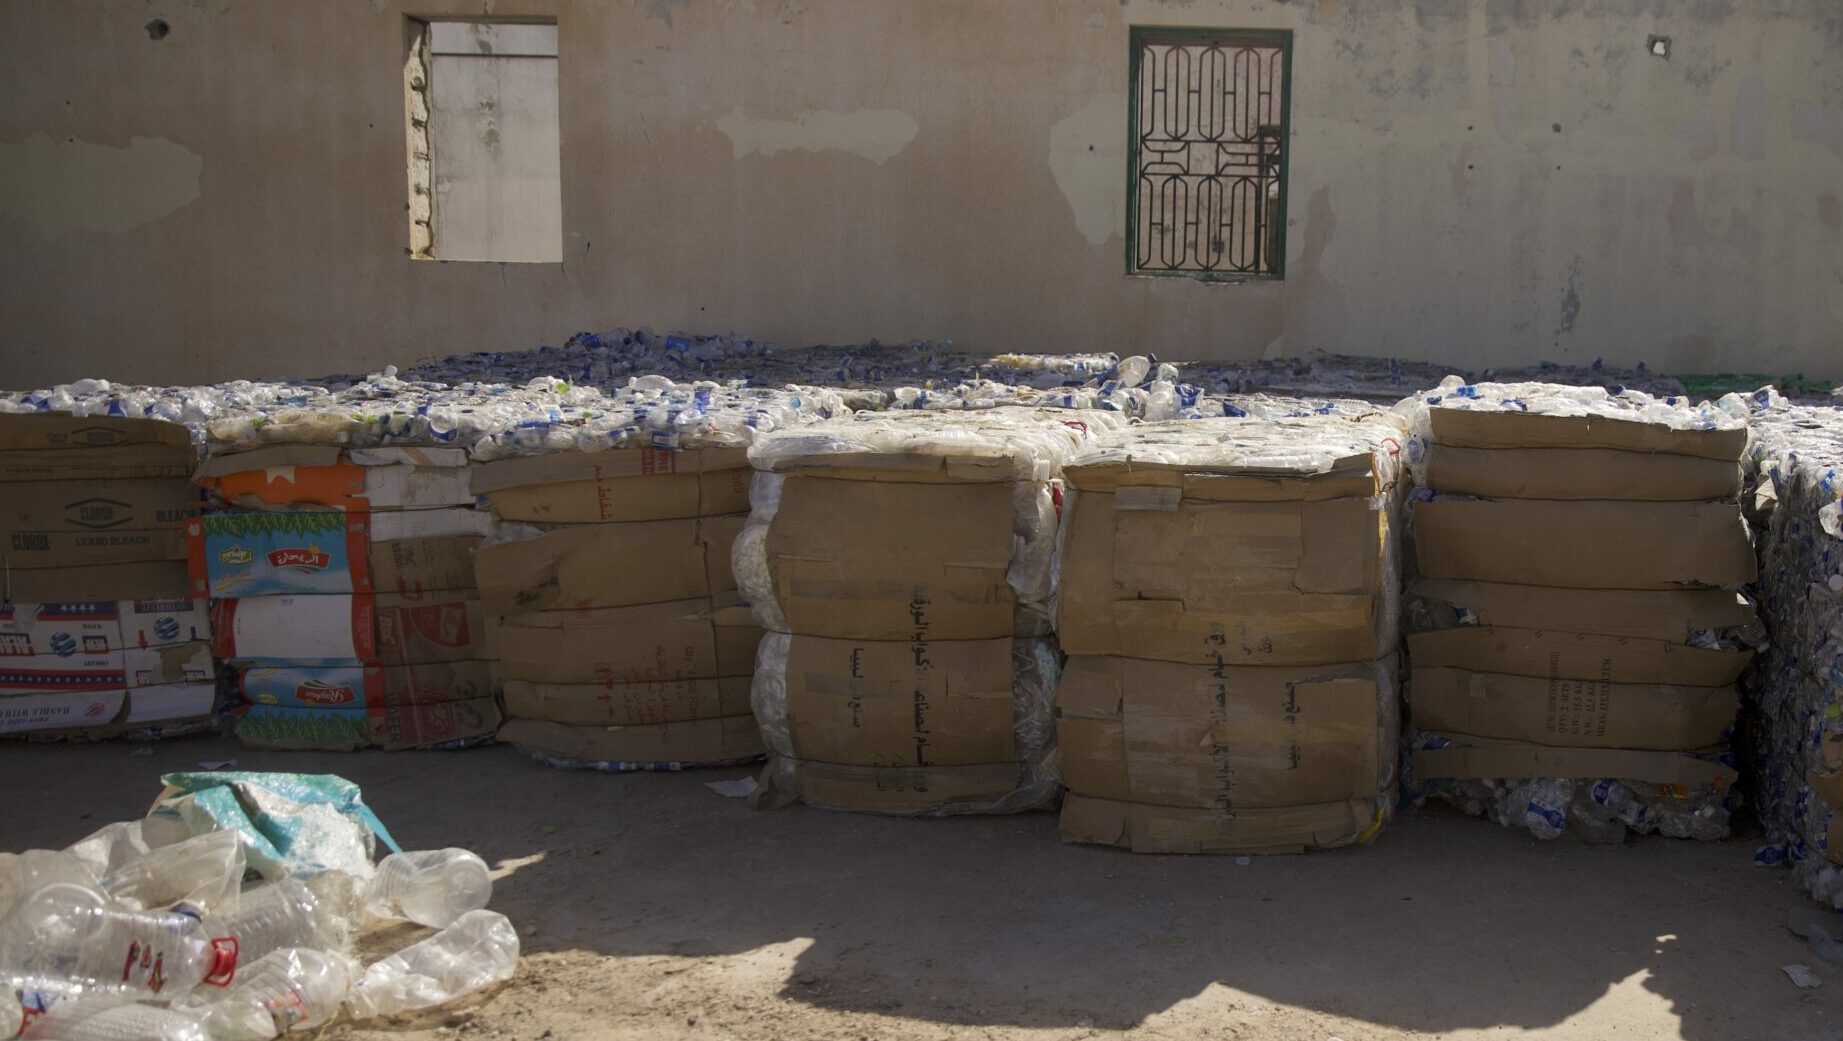 In Libya, one person’s garbage is another person’s gain